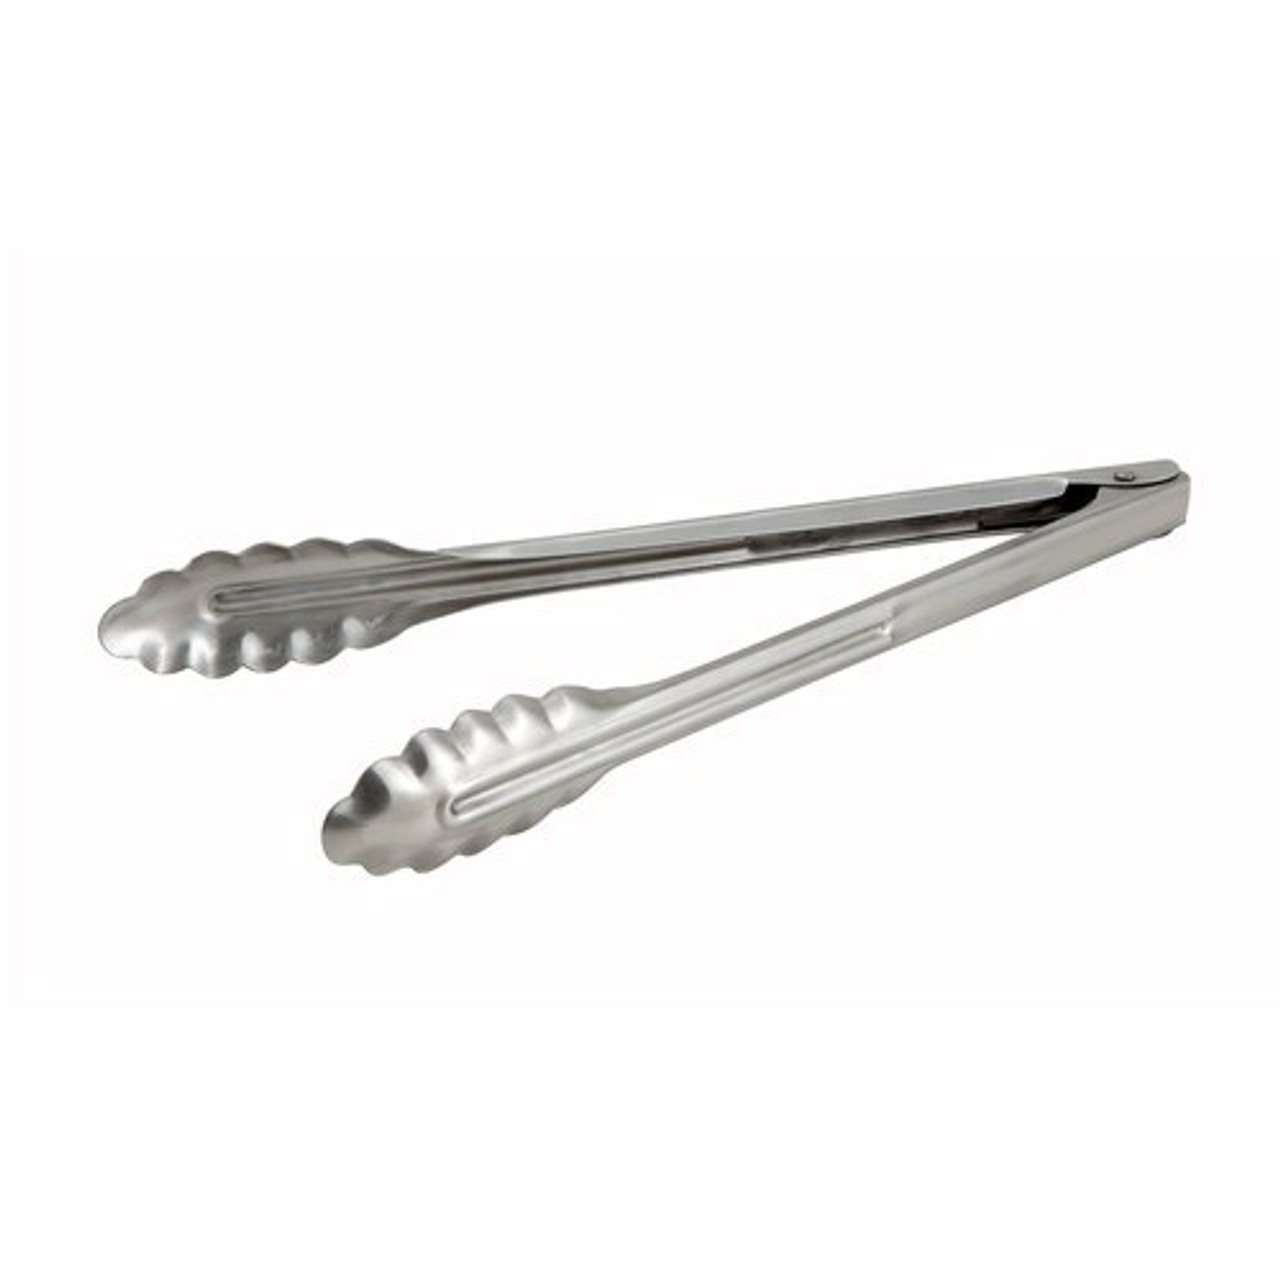 Utility Tongs, 9", coiled spring, scalloped edge, heavy weight 0.9 millimeter stainless steel